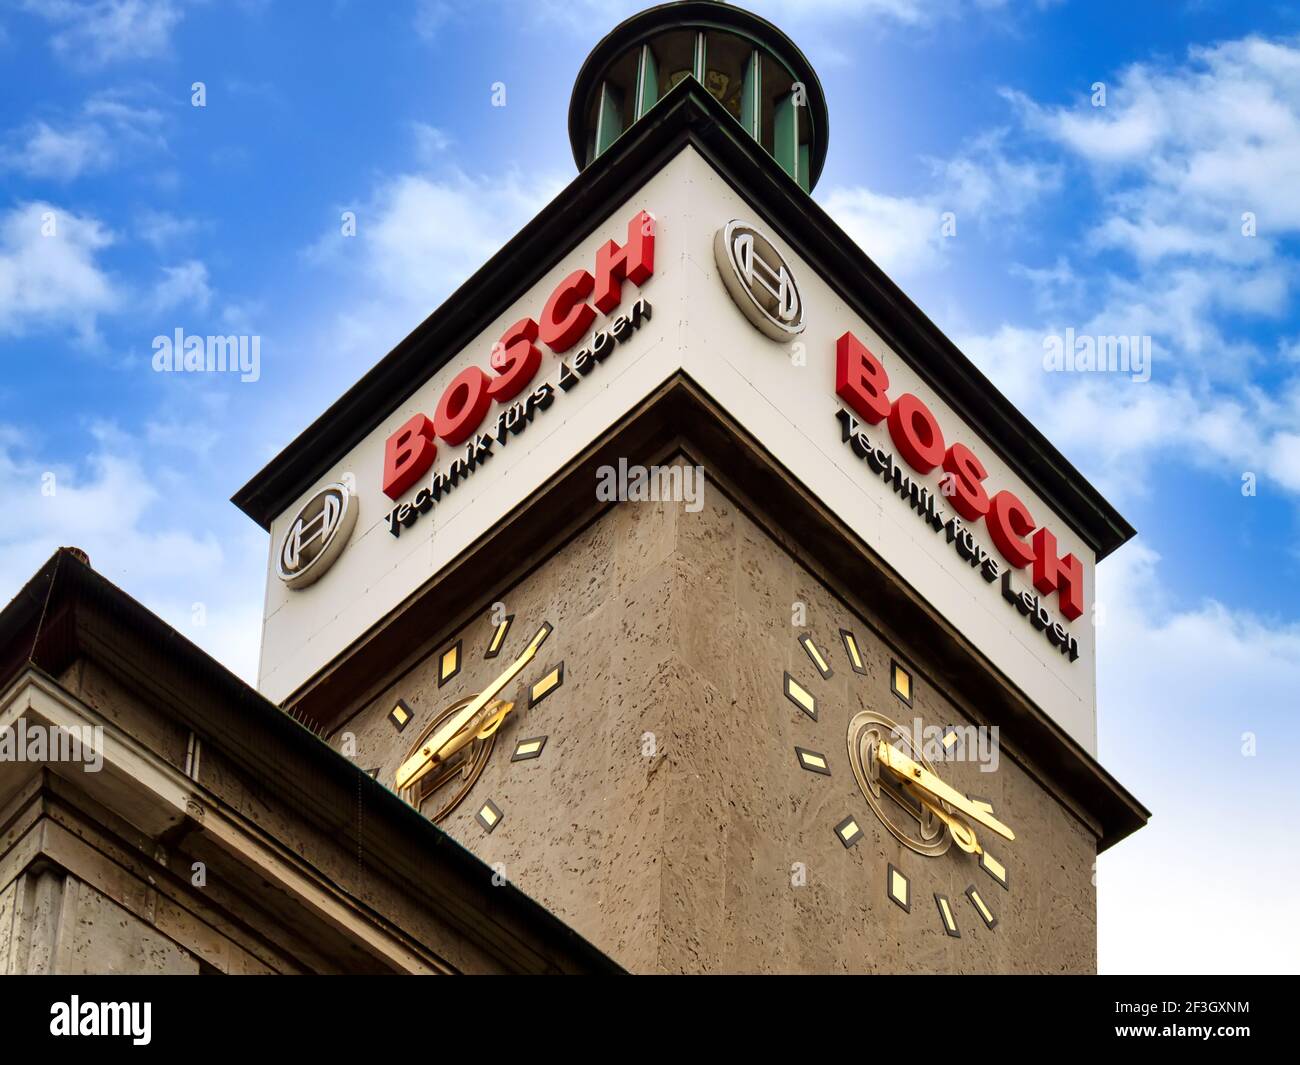 Bosch thermotechnology hi-res stock photography and images - Alamy